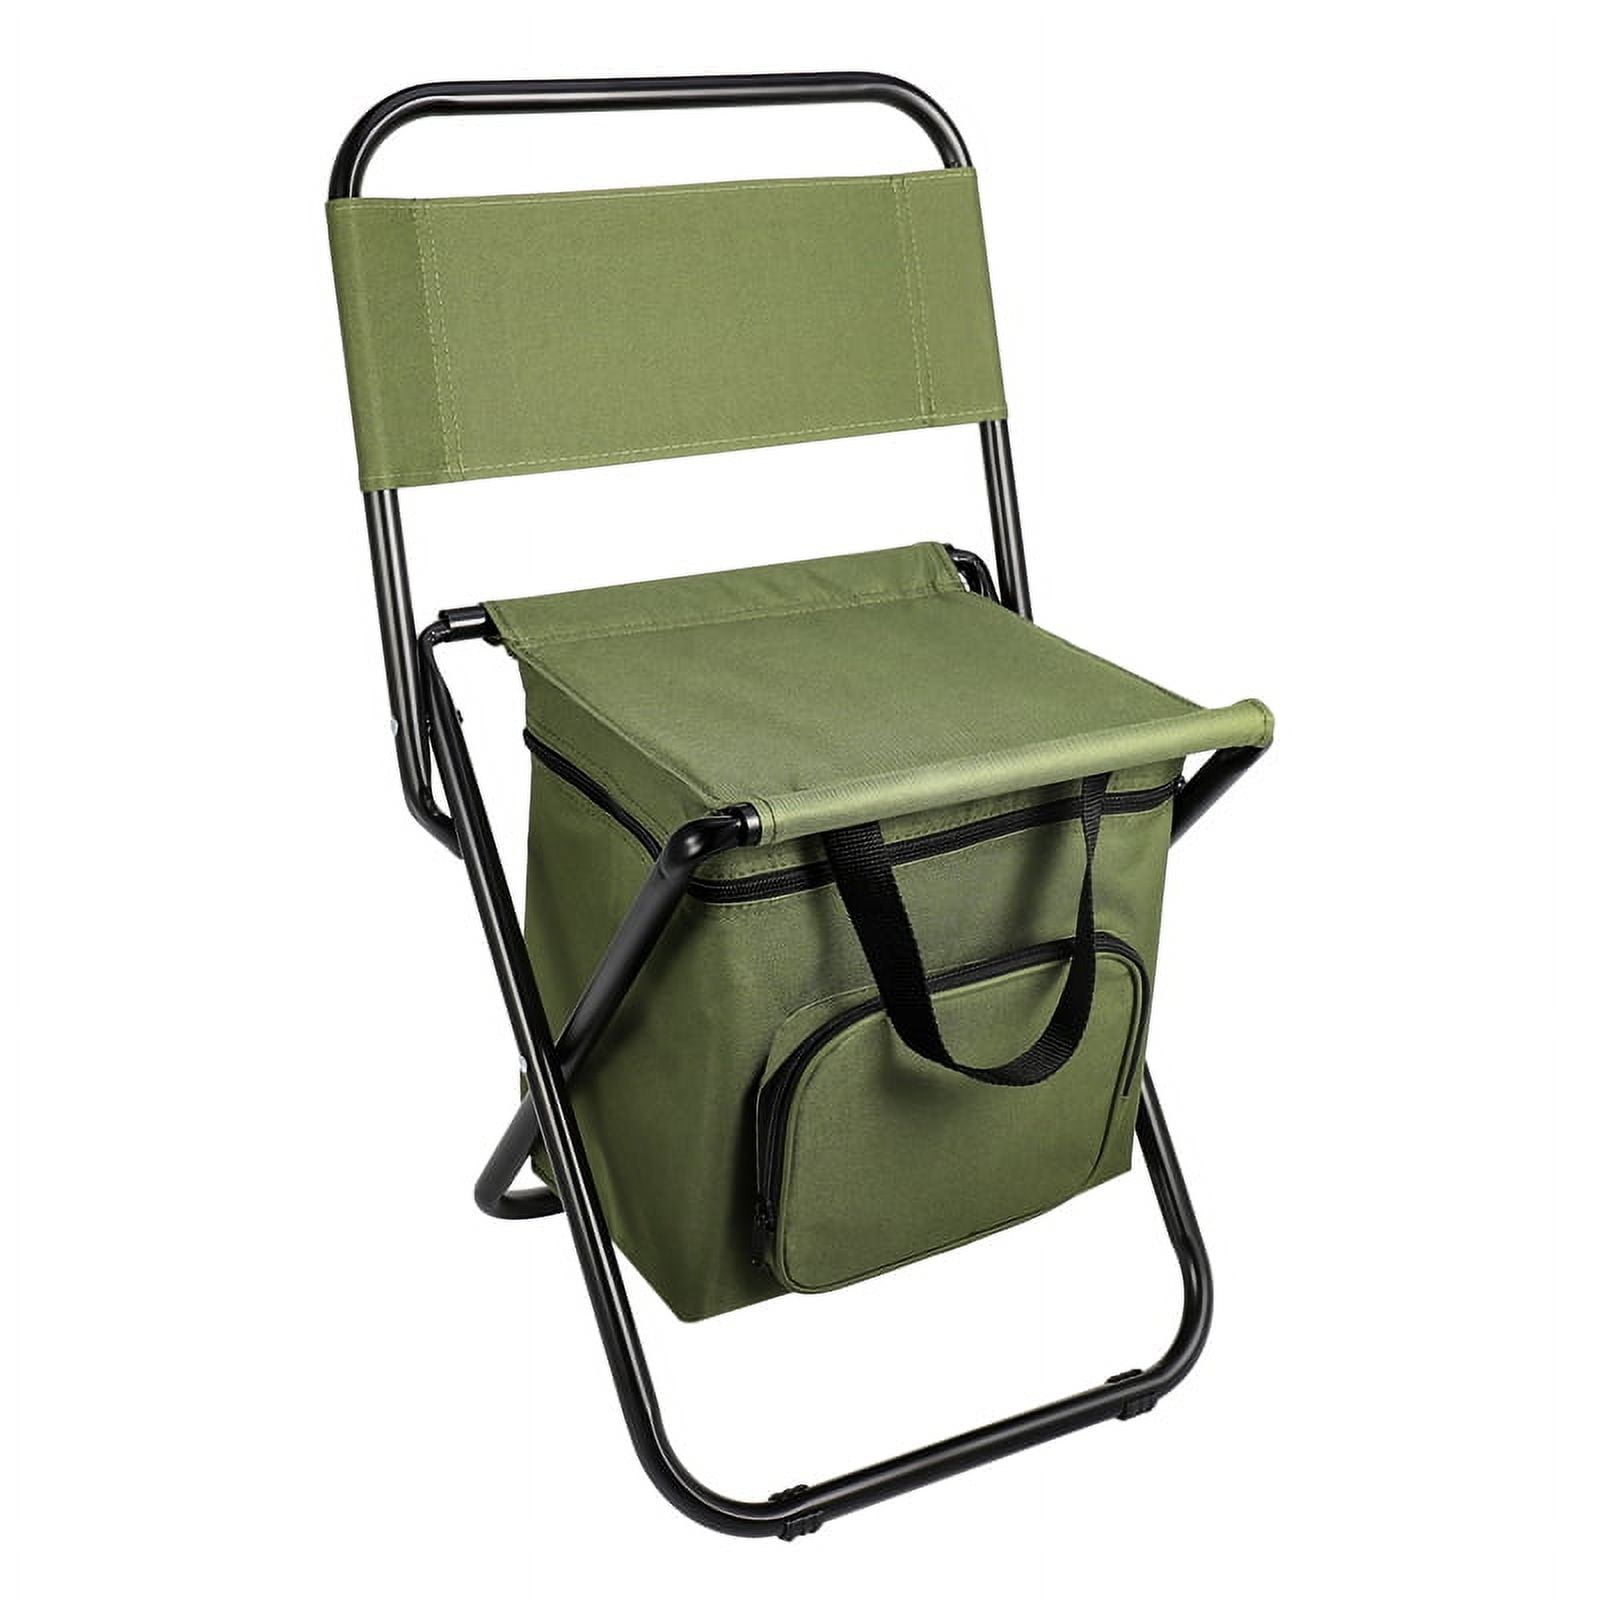 JUNDALIE 3-in-1 Fishing Camping Chair Stool with Carry Bag, Portable  Backrest Fishing Backpack Chair Seat Cooler Bag, Hiking Seat Fishing Stool  for Adult Outdoor Picnic, Traveling, Oxford(Green)(Camouflage) 